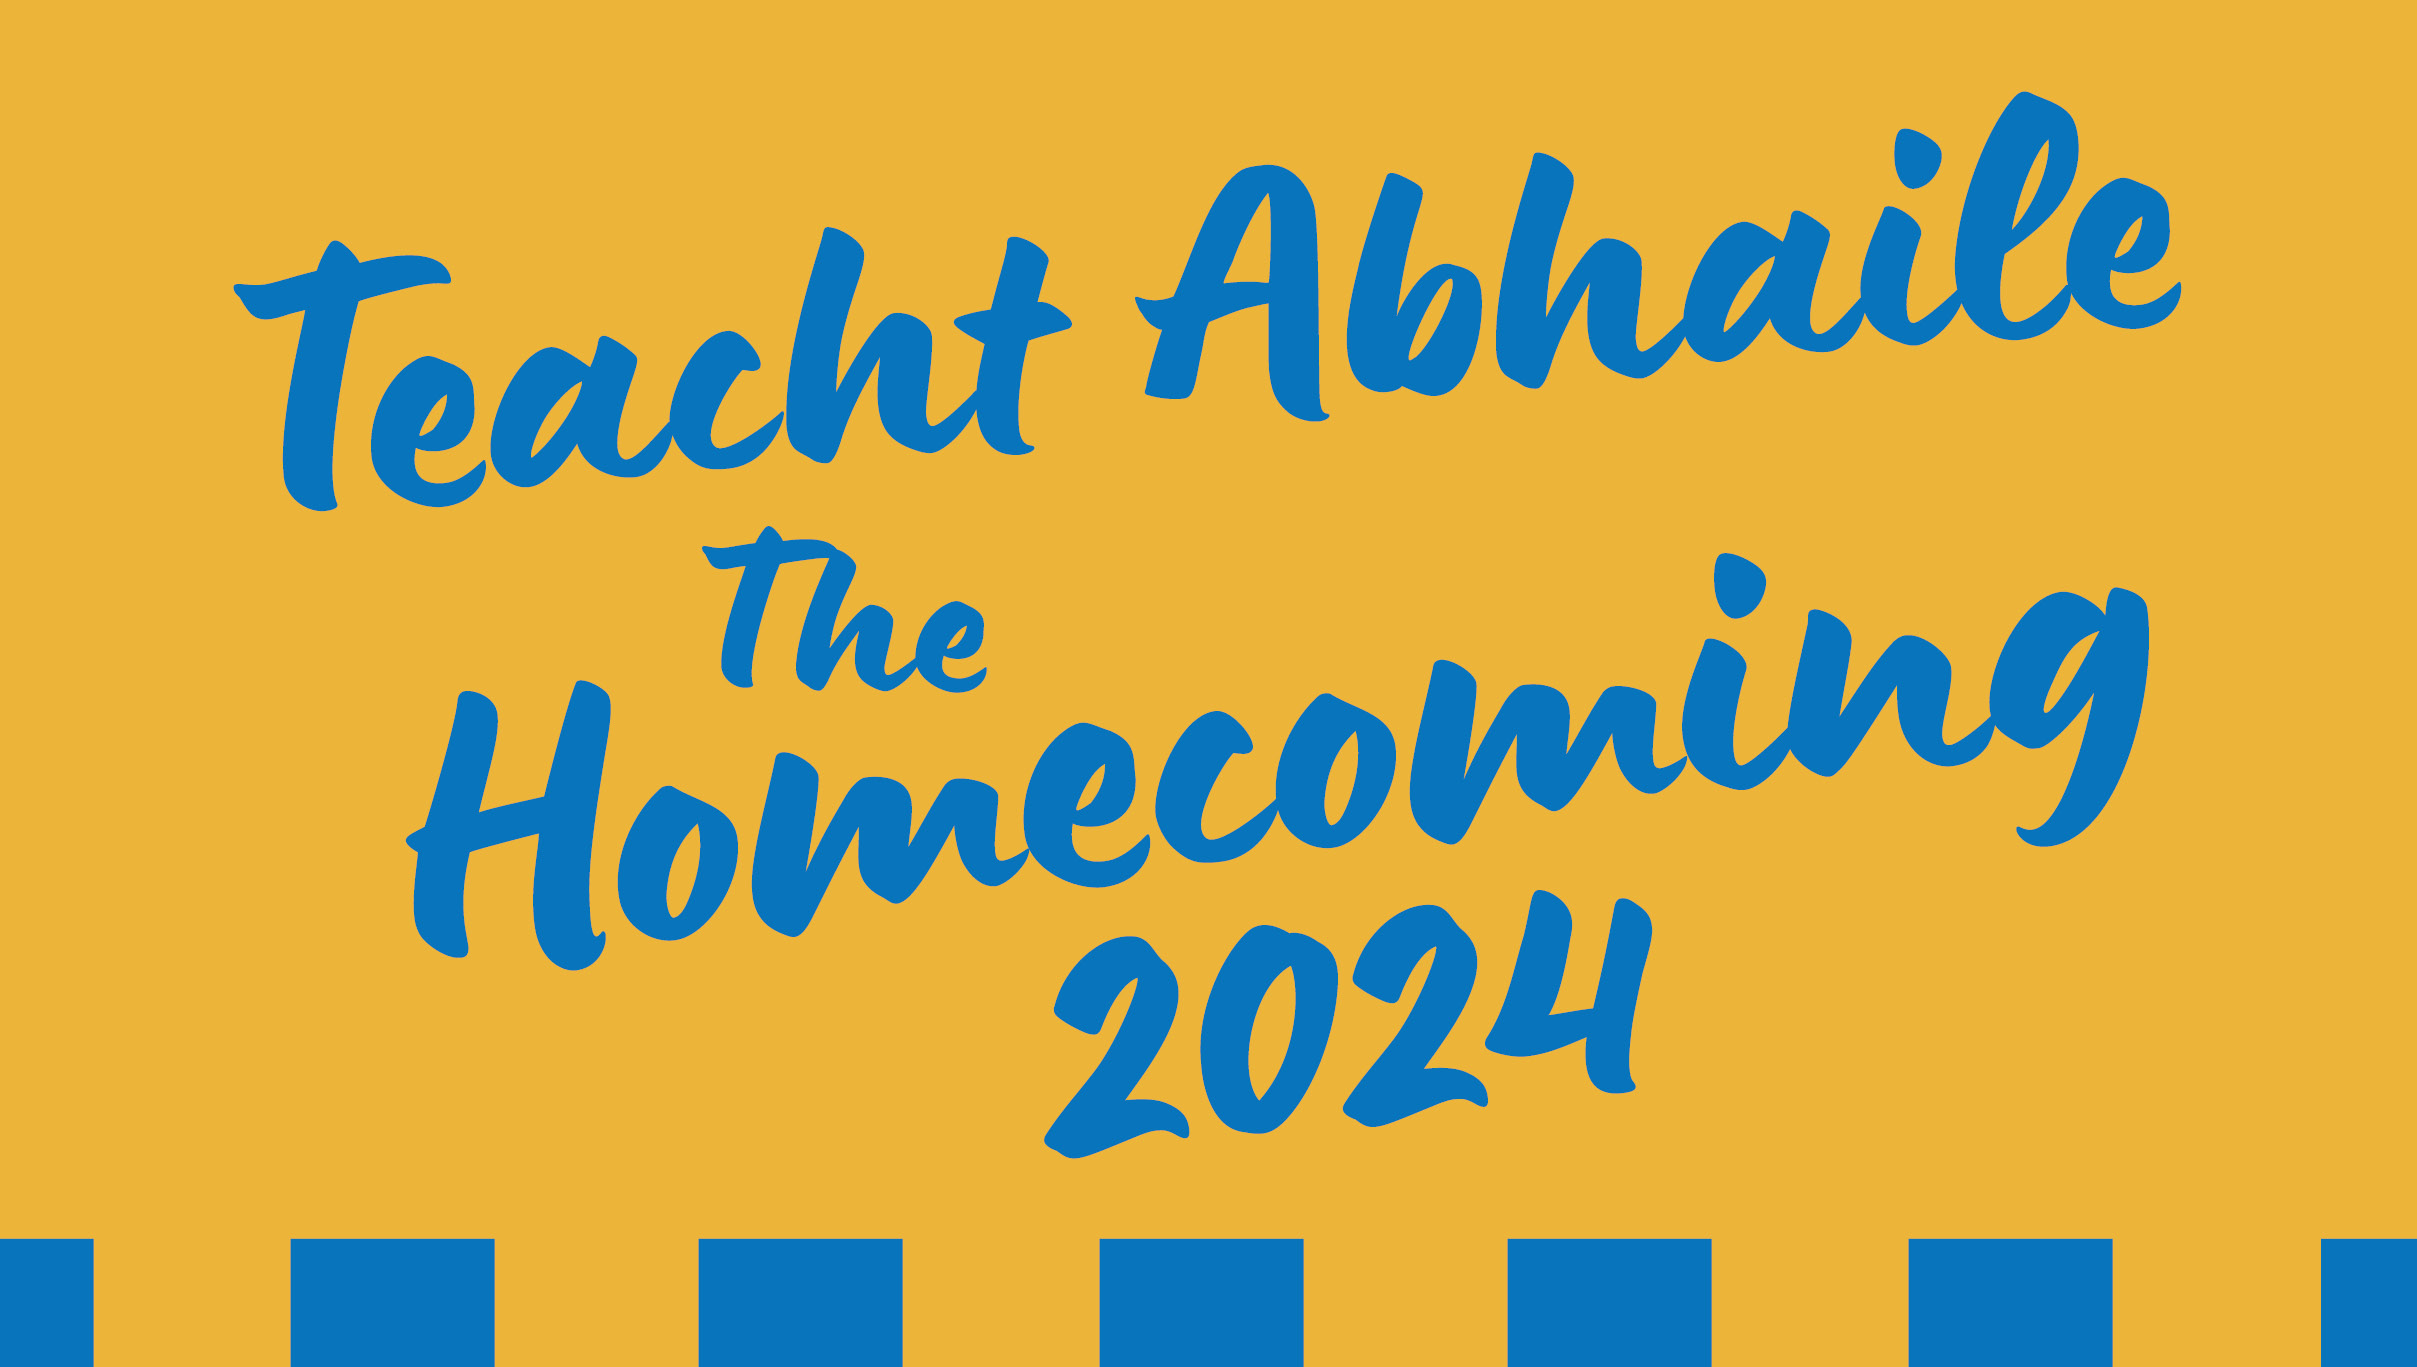 The Homecoming 2024